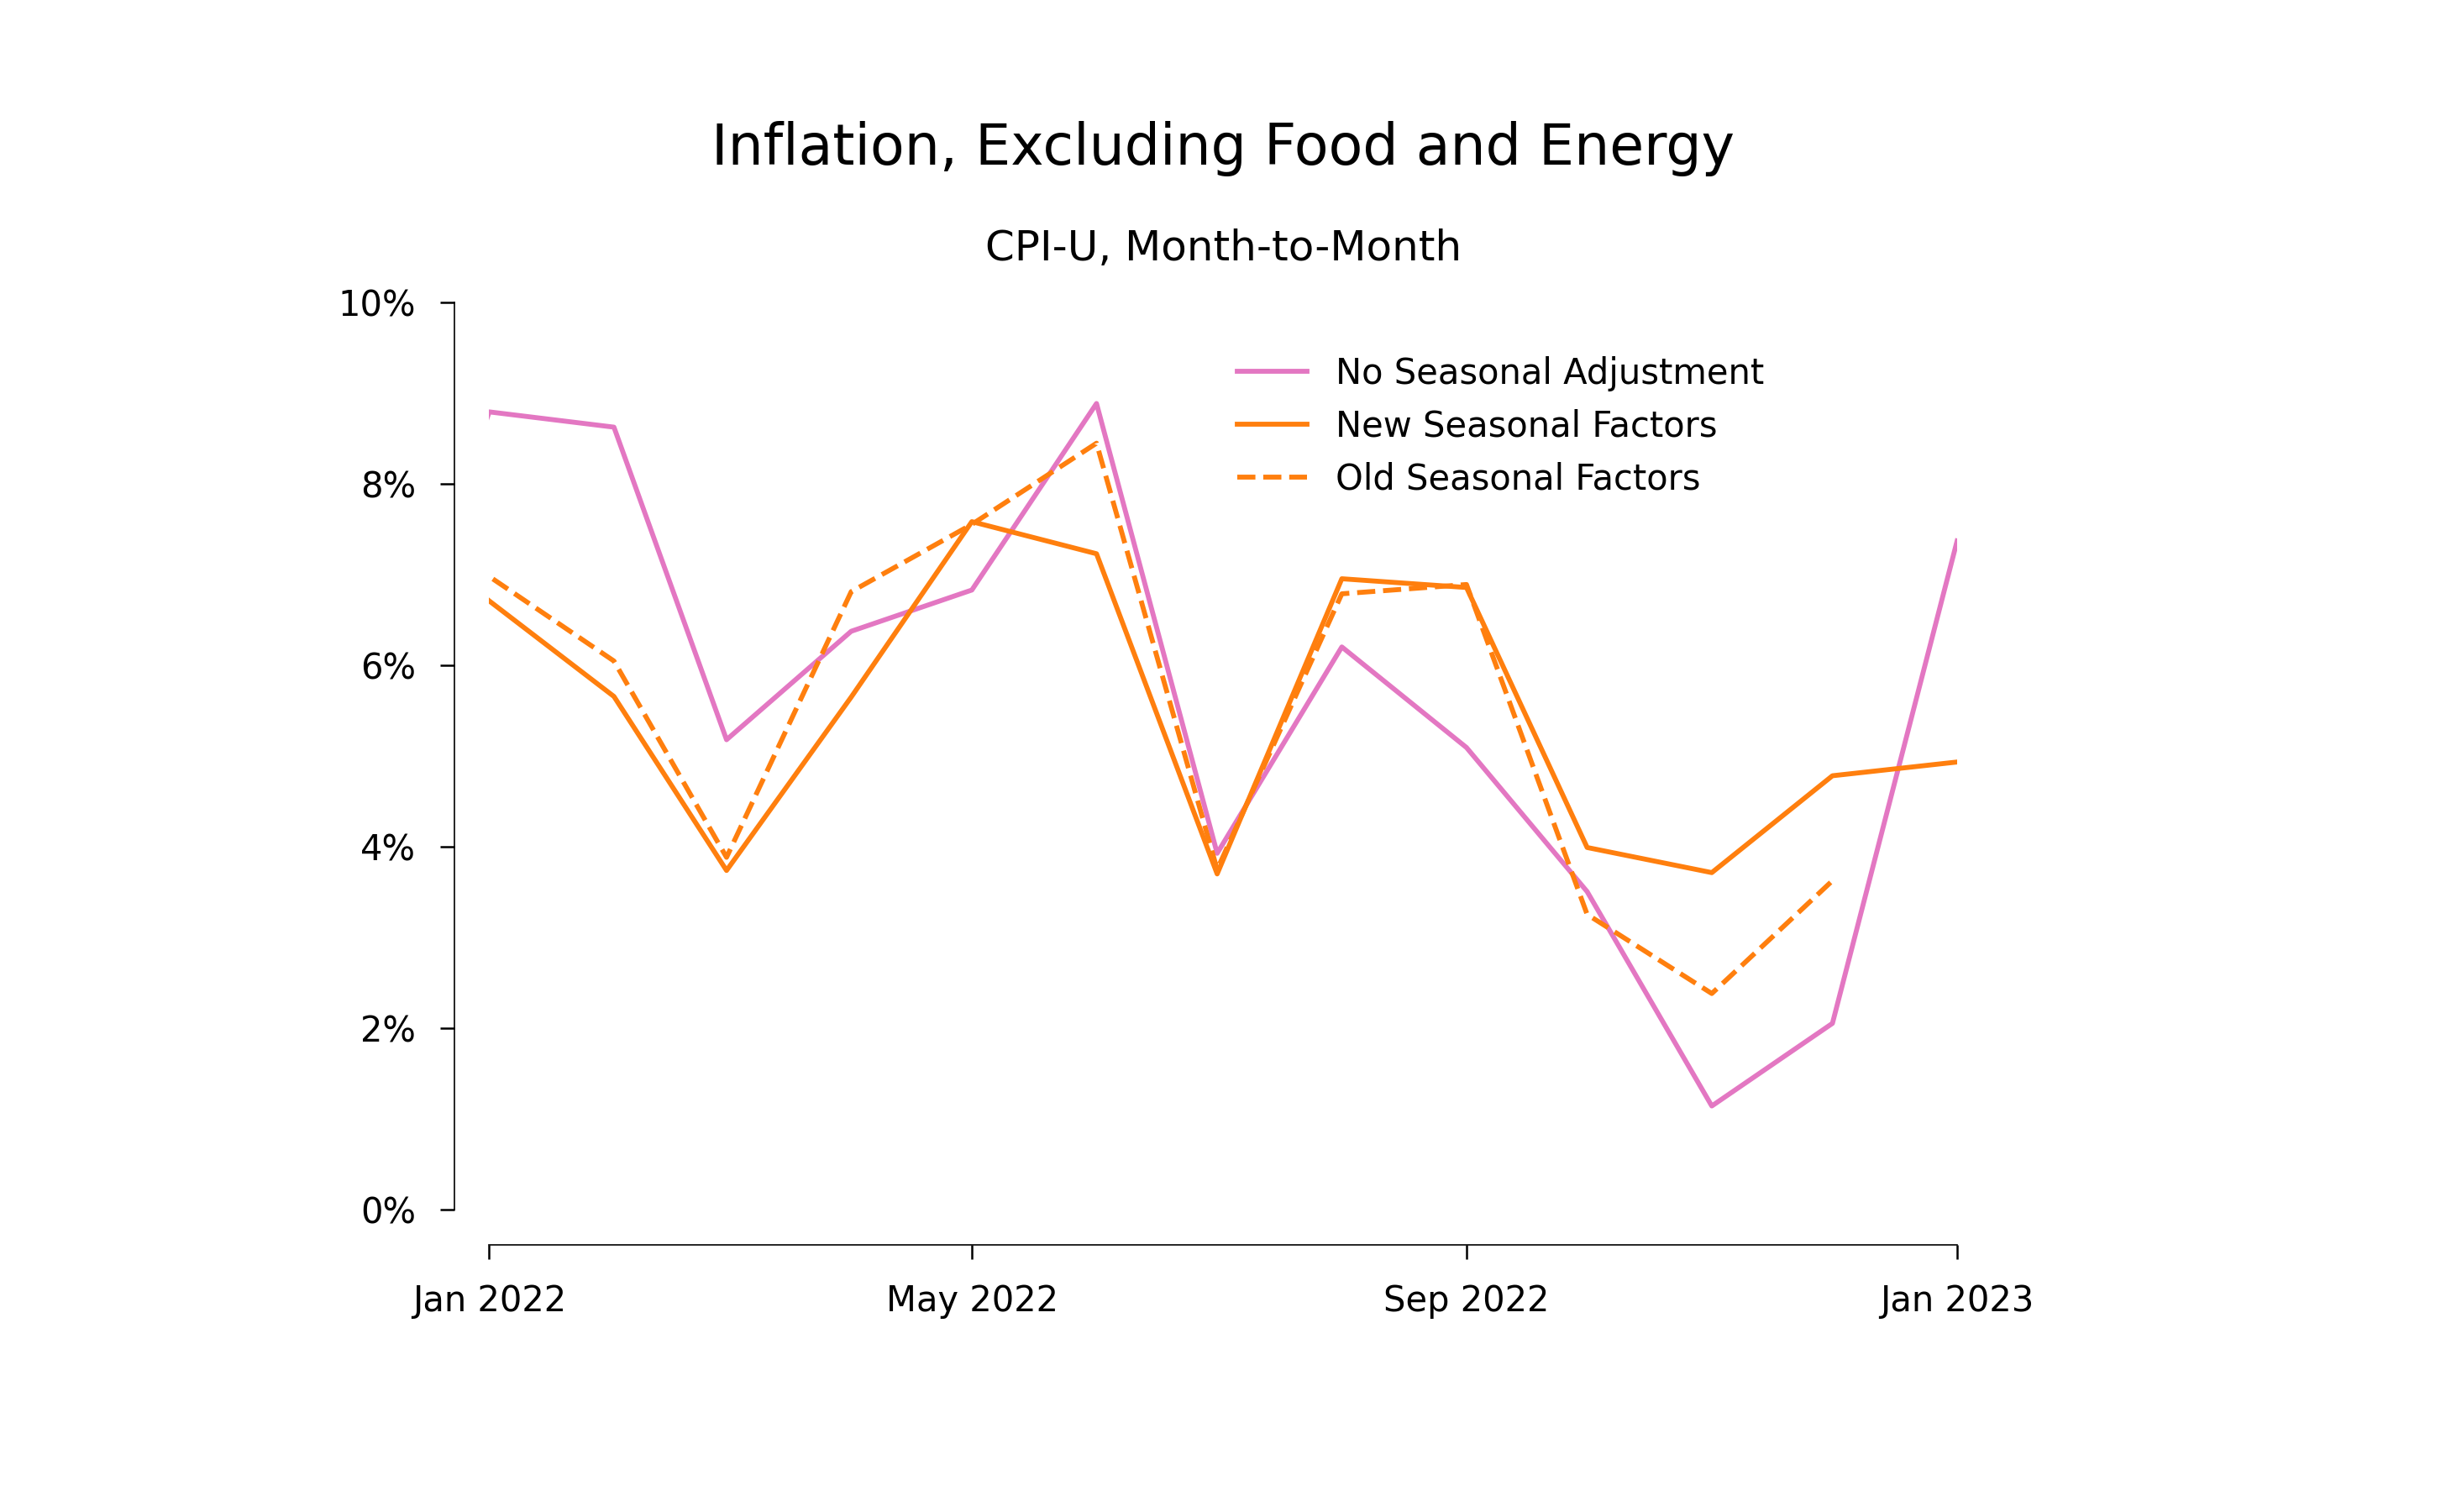 Inflation during 2022, not seasonally adjusted